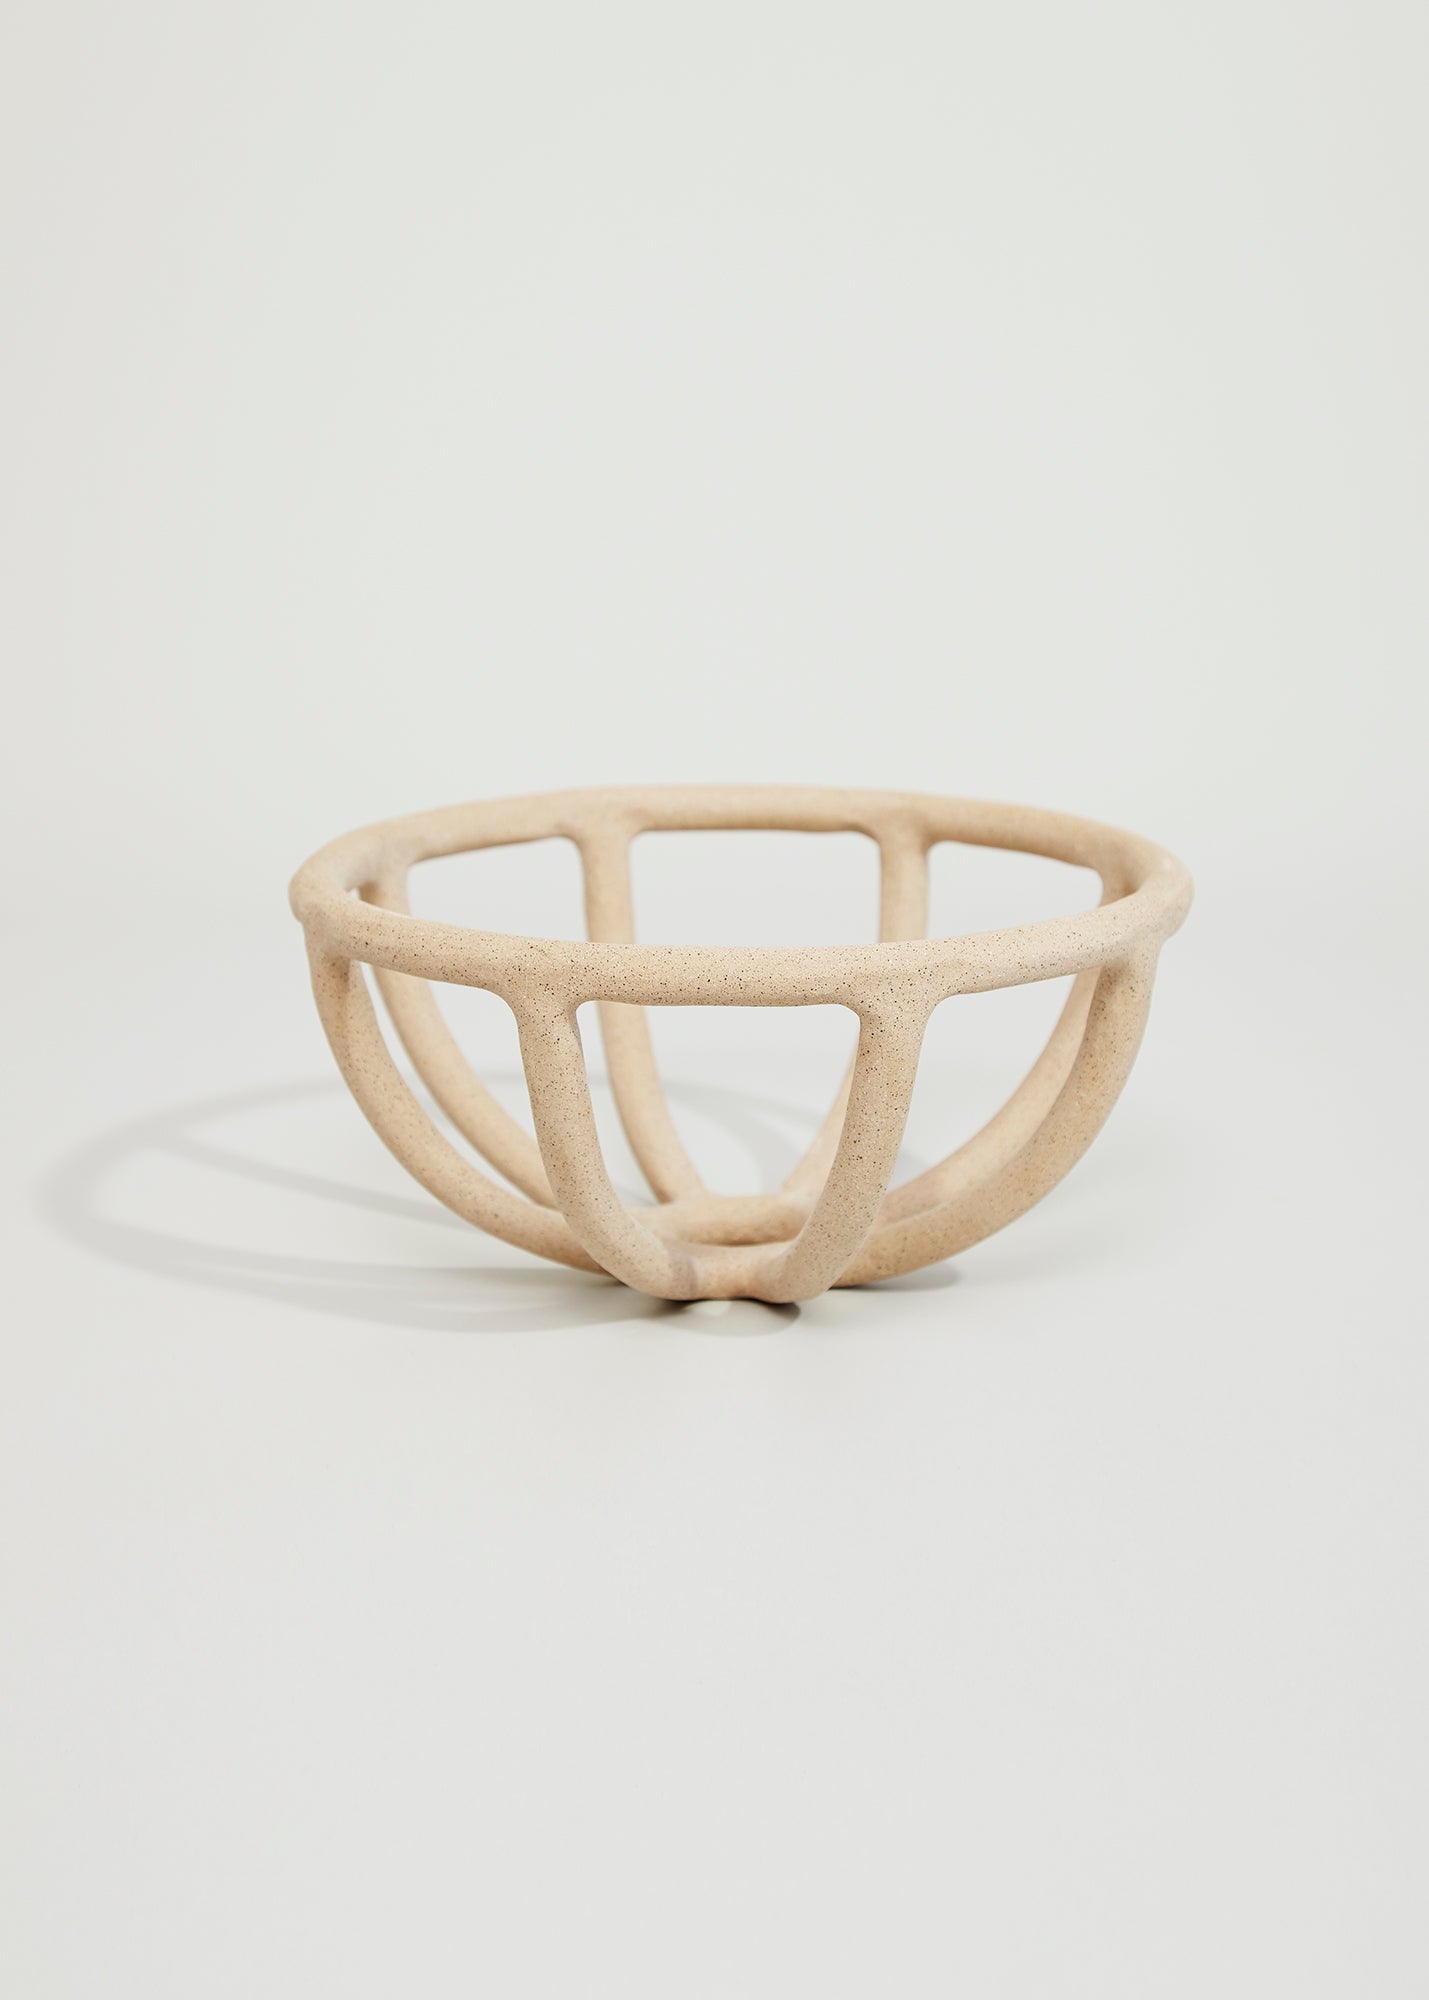 Fruit Bowl · Prong · Speckled - Trine Tuxen Jewelry